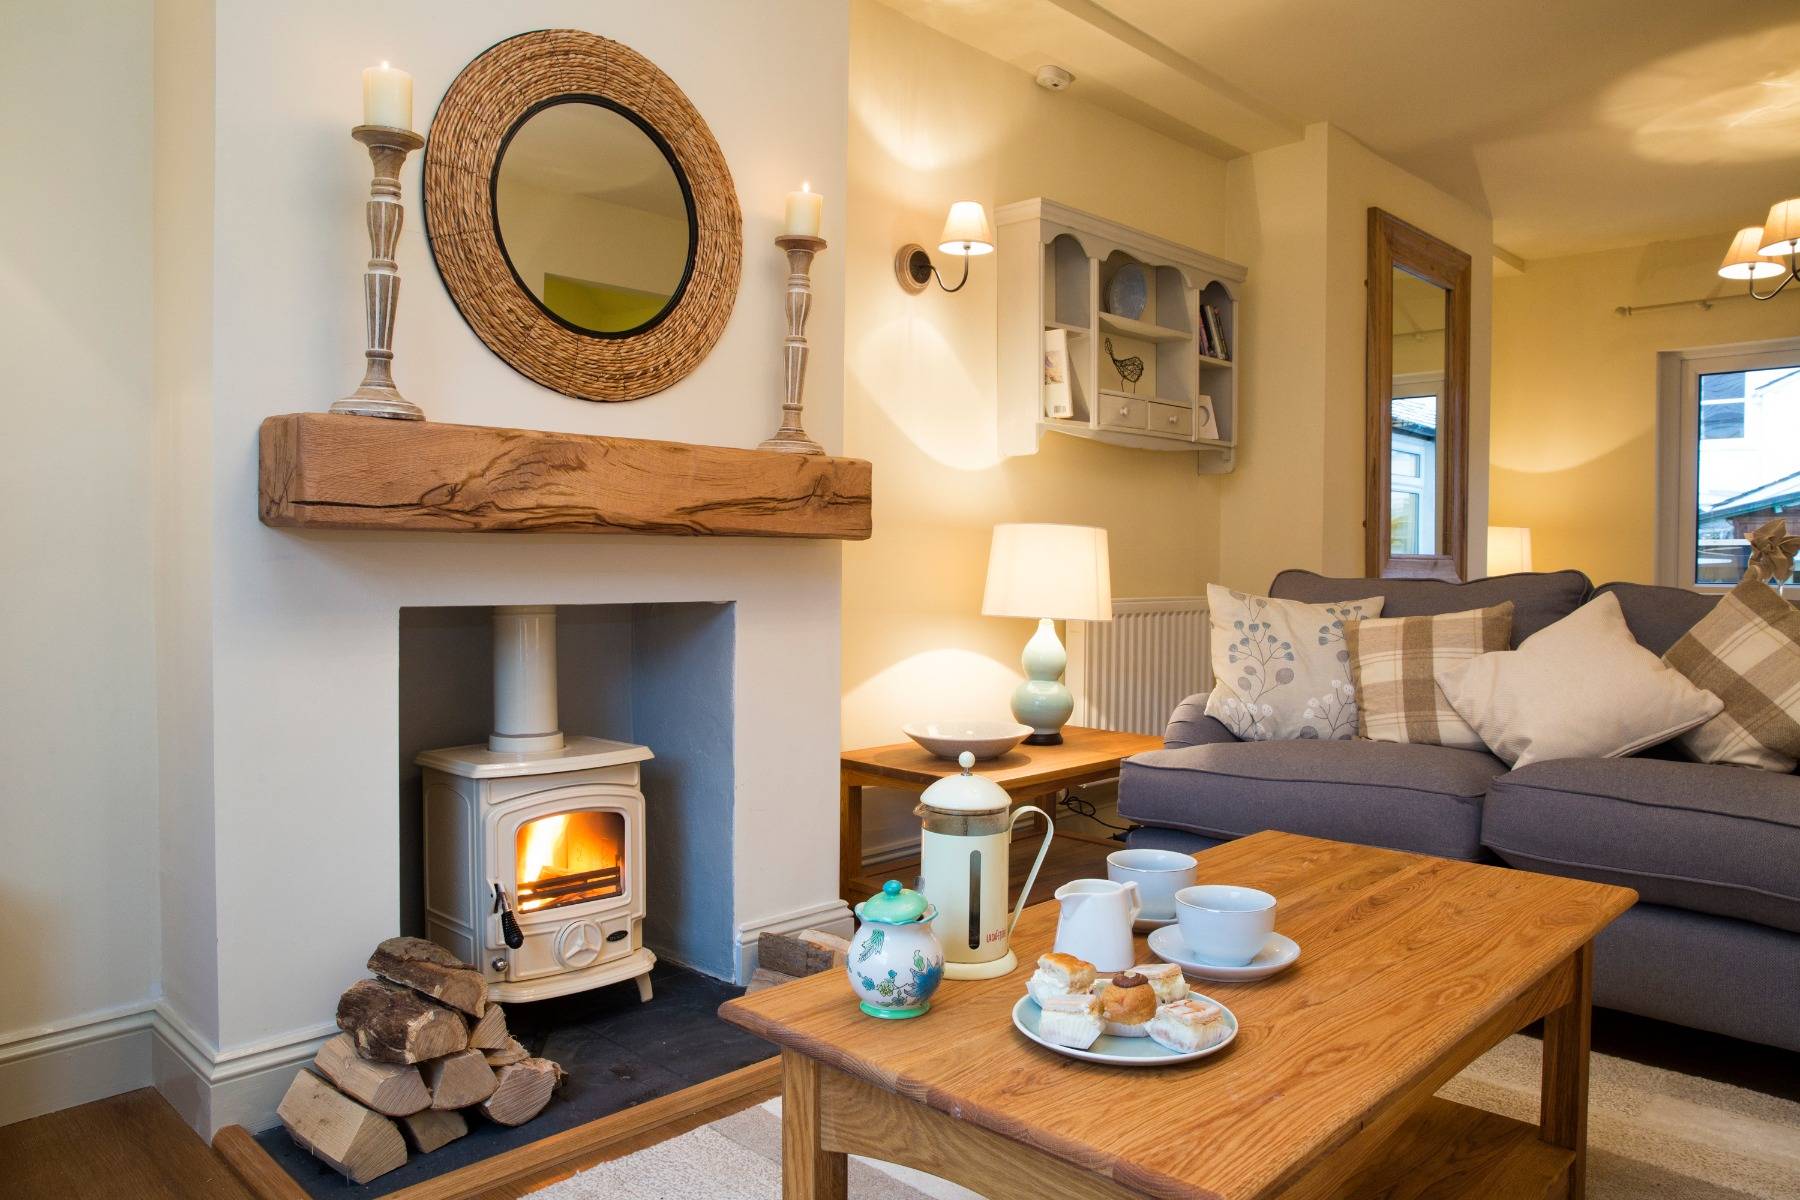 How to Decorate a Room With a Wood Burning Stove 